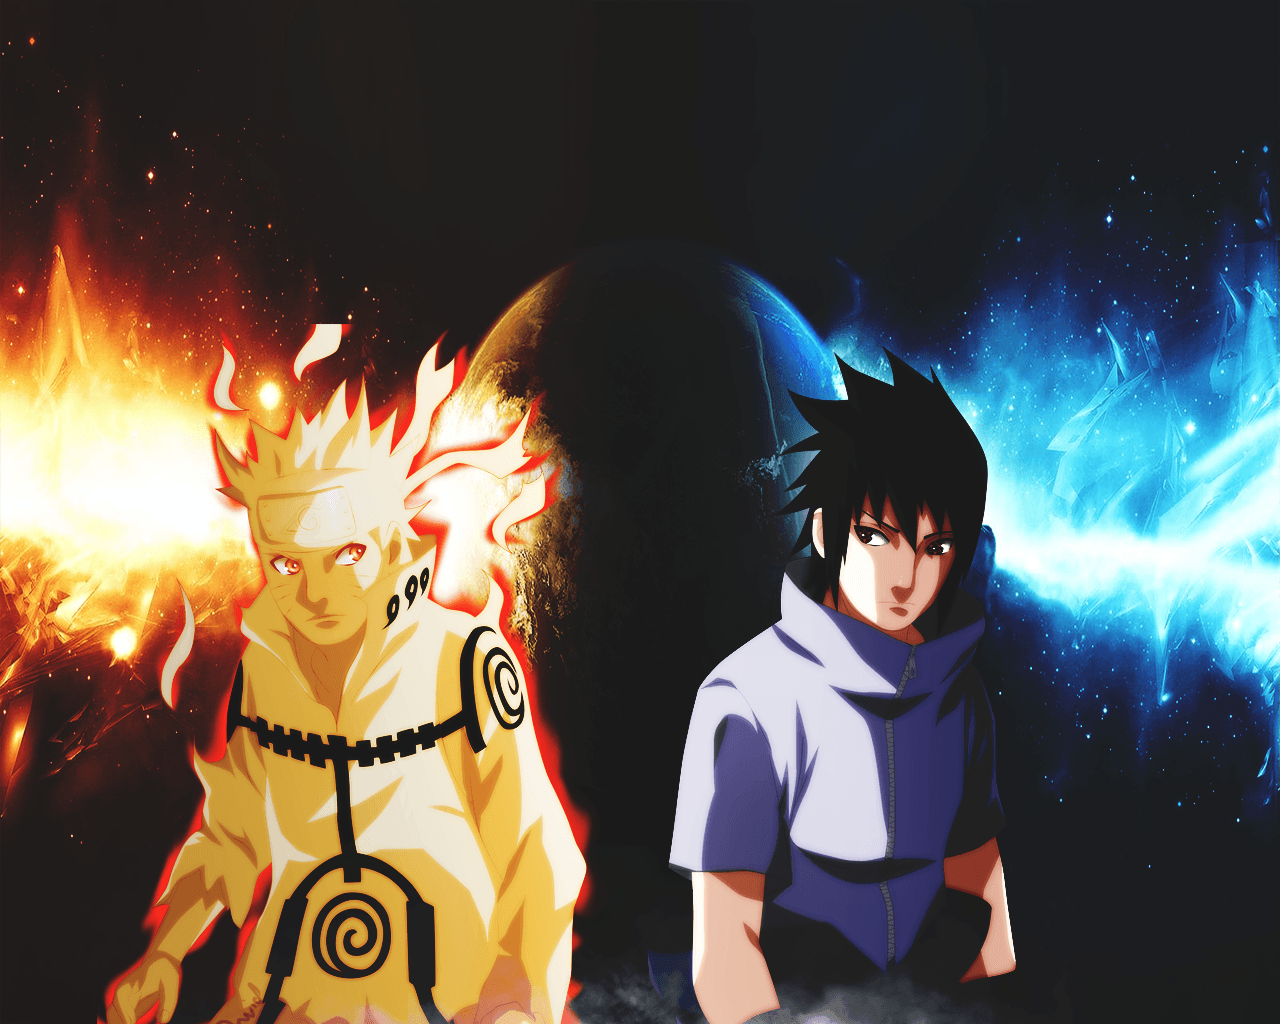 Download the Naruto Fire Style Wallpaper, Naruto Fire Style iPhone